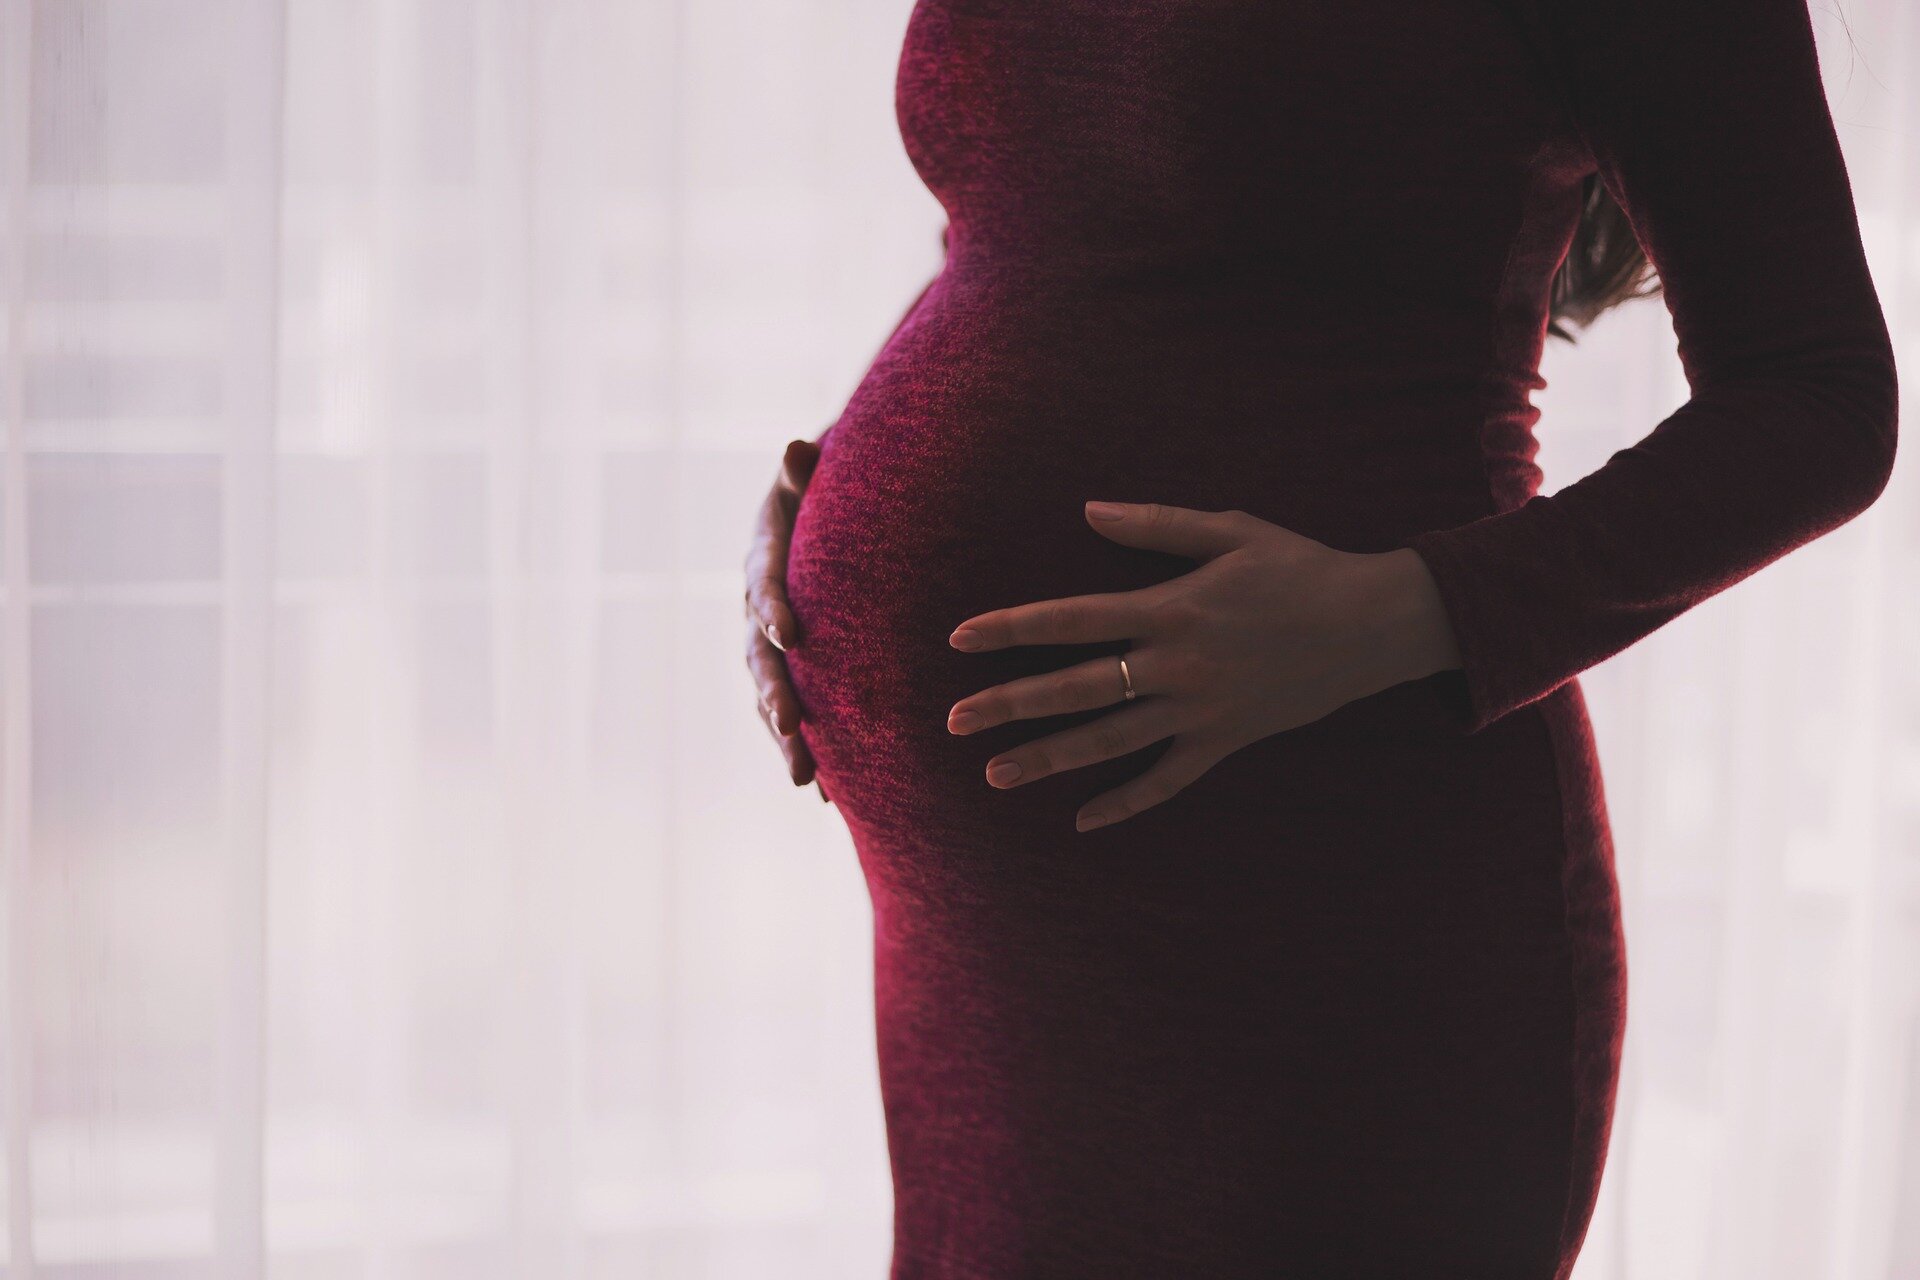 COVID-19 mRNA vaccines are safe in pregnancy, large study confirms